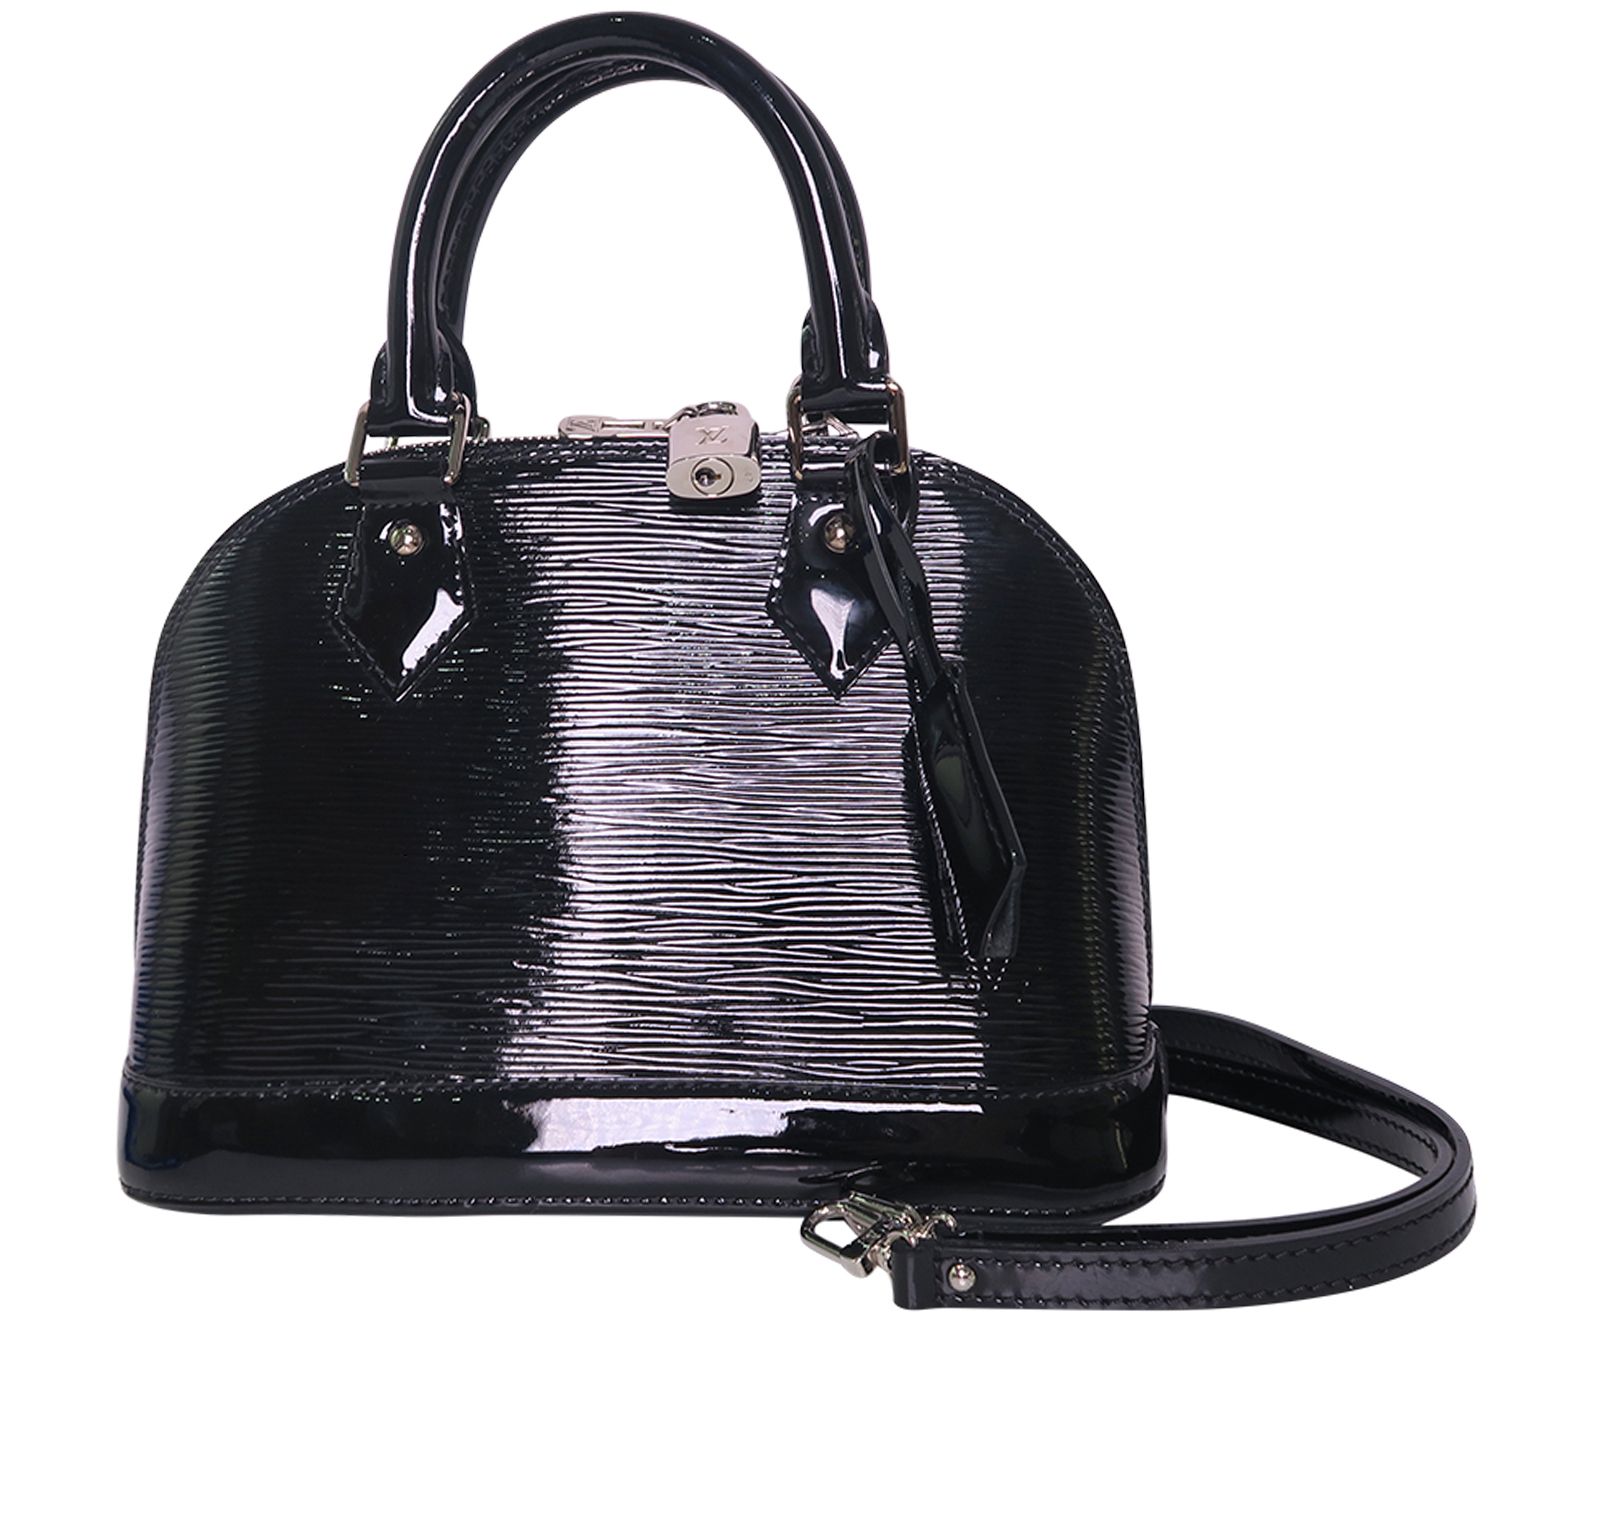 Louis Vuitton - Authenticated Alma Bb Handbag - Patent Leather Black for Women, Very Good Condition